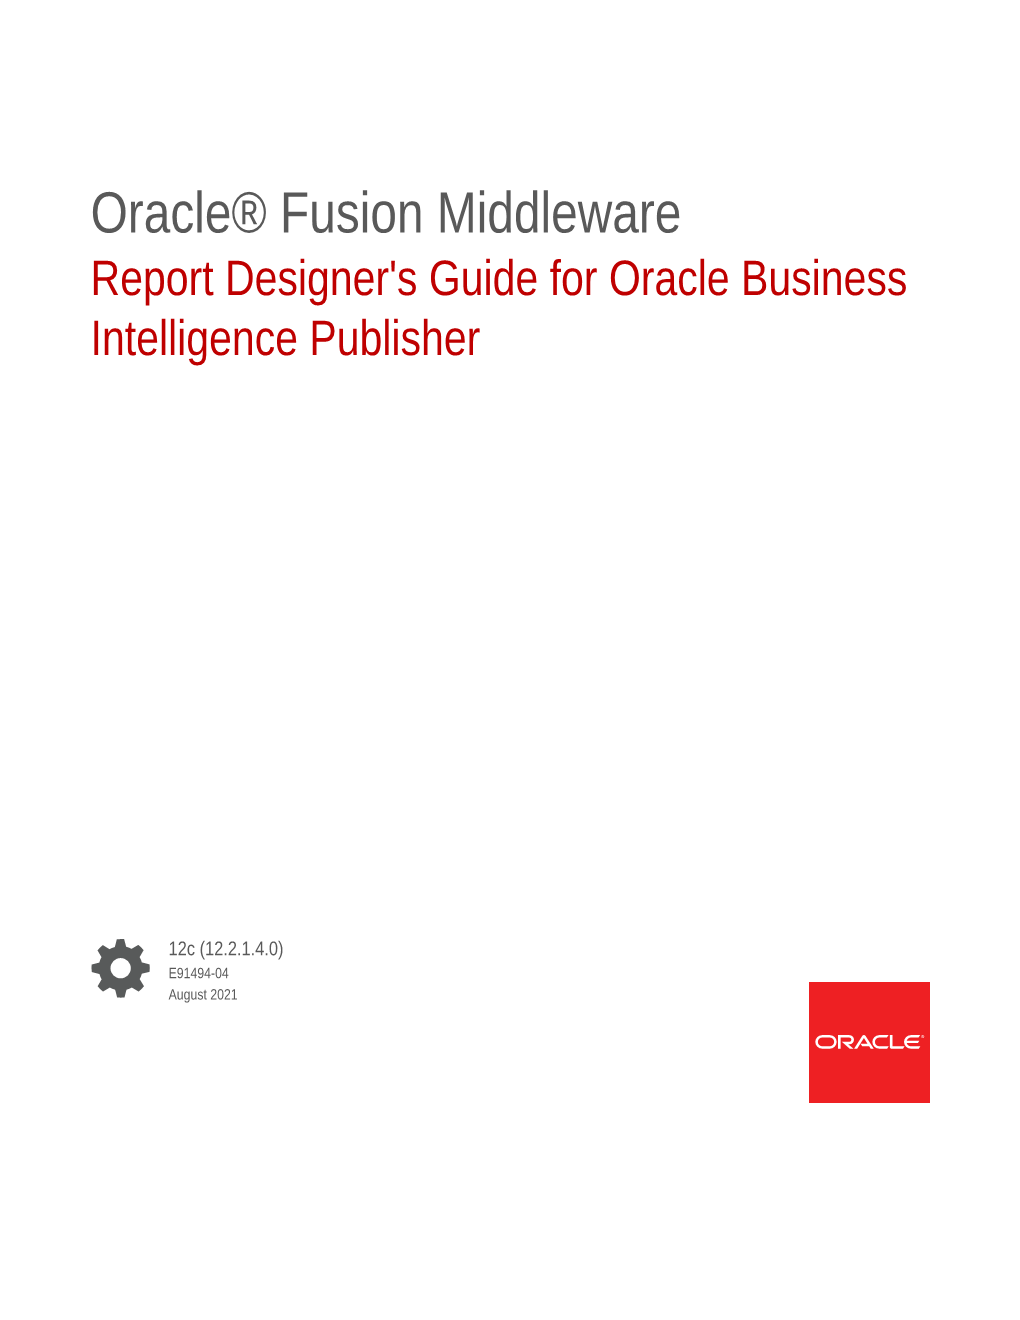 Report Designer's Guide for Oracle Business Intelligence Publisher